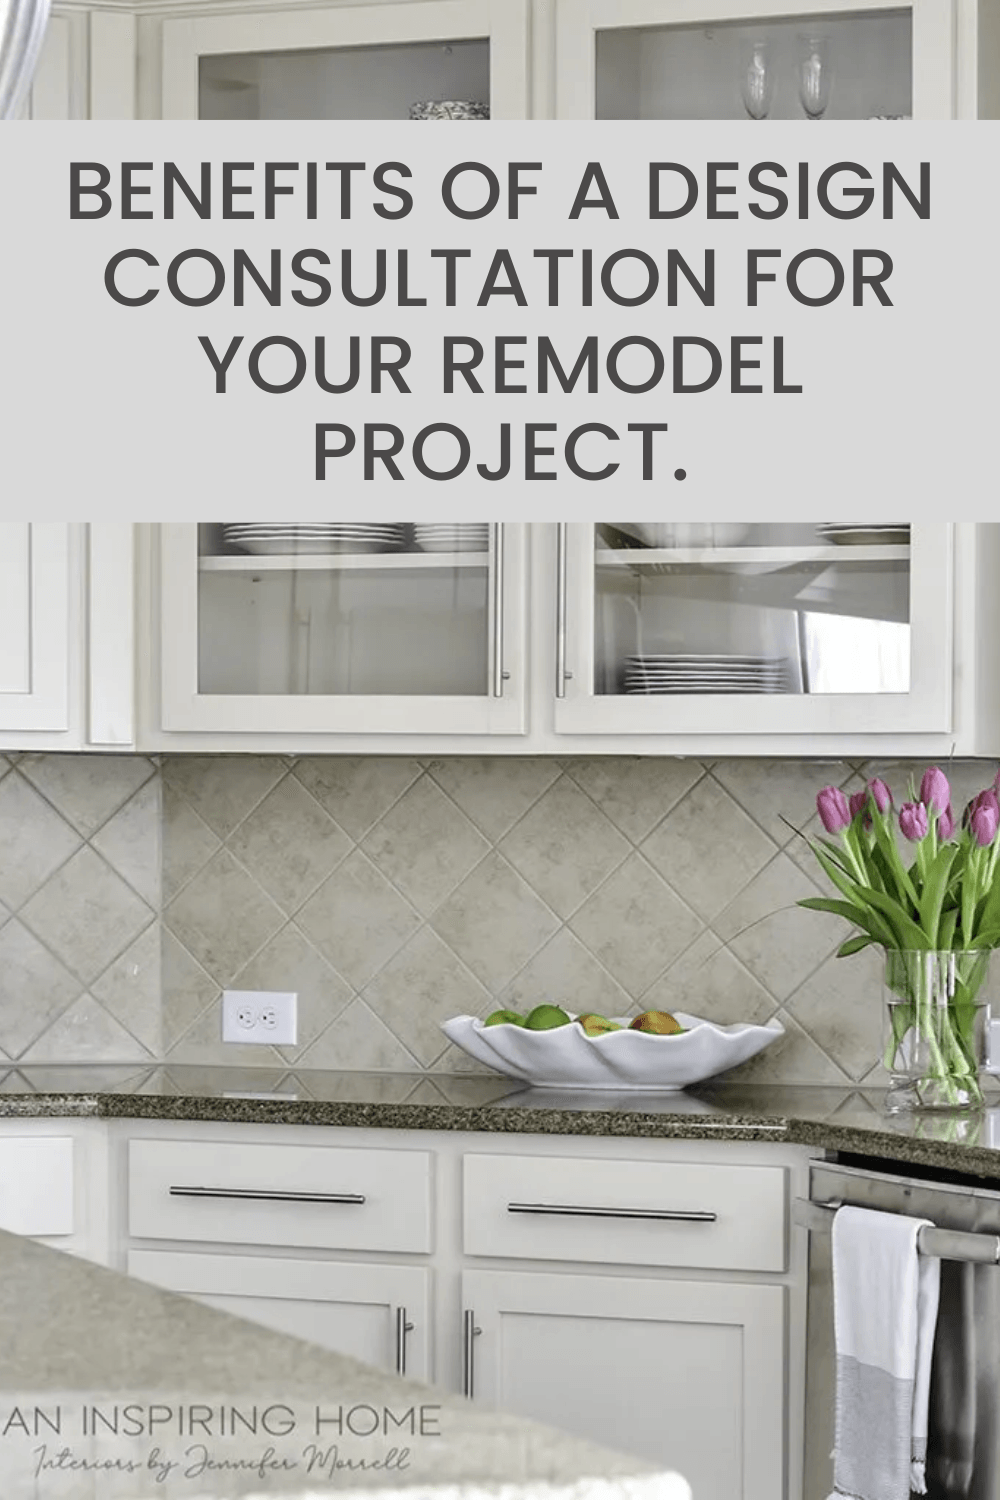 Benefits of a Design Consultation for your remodel project.